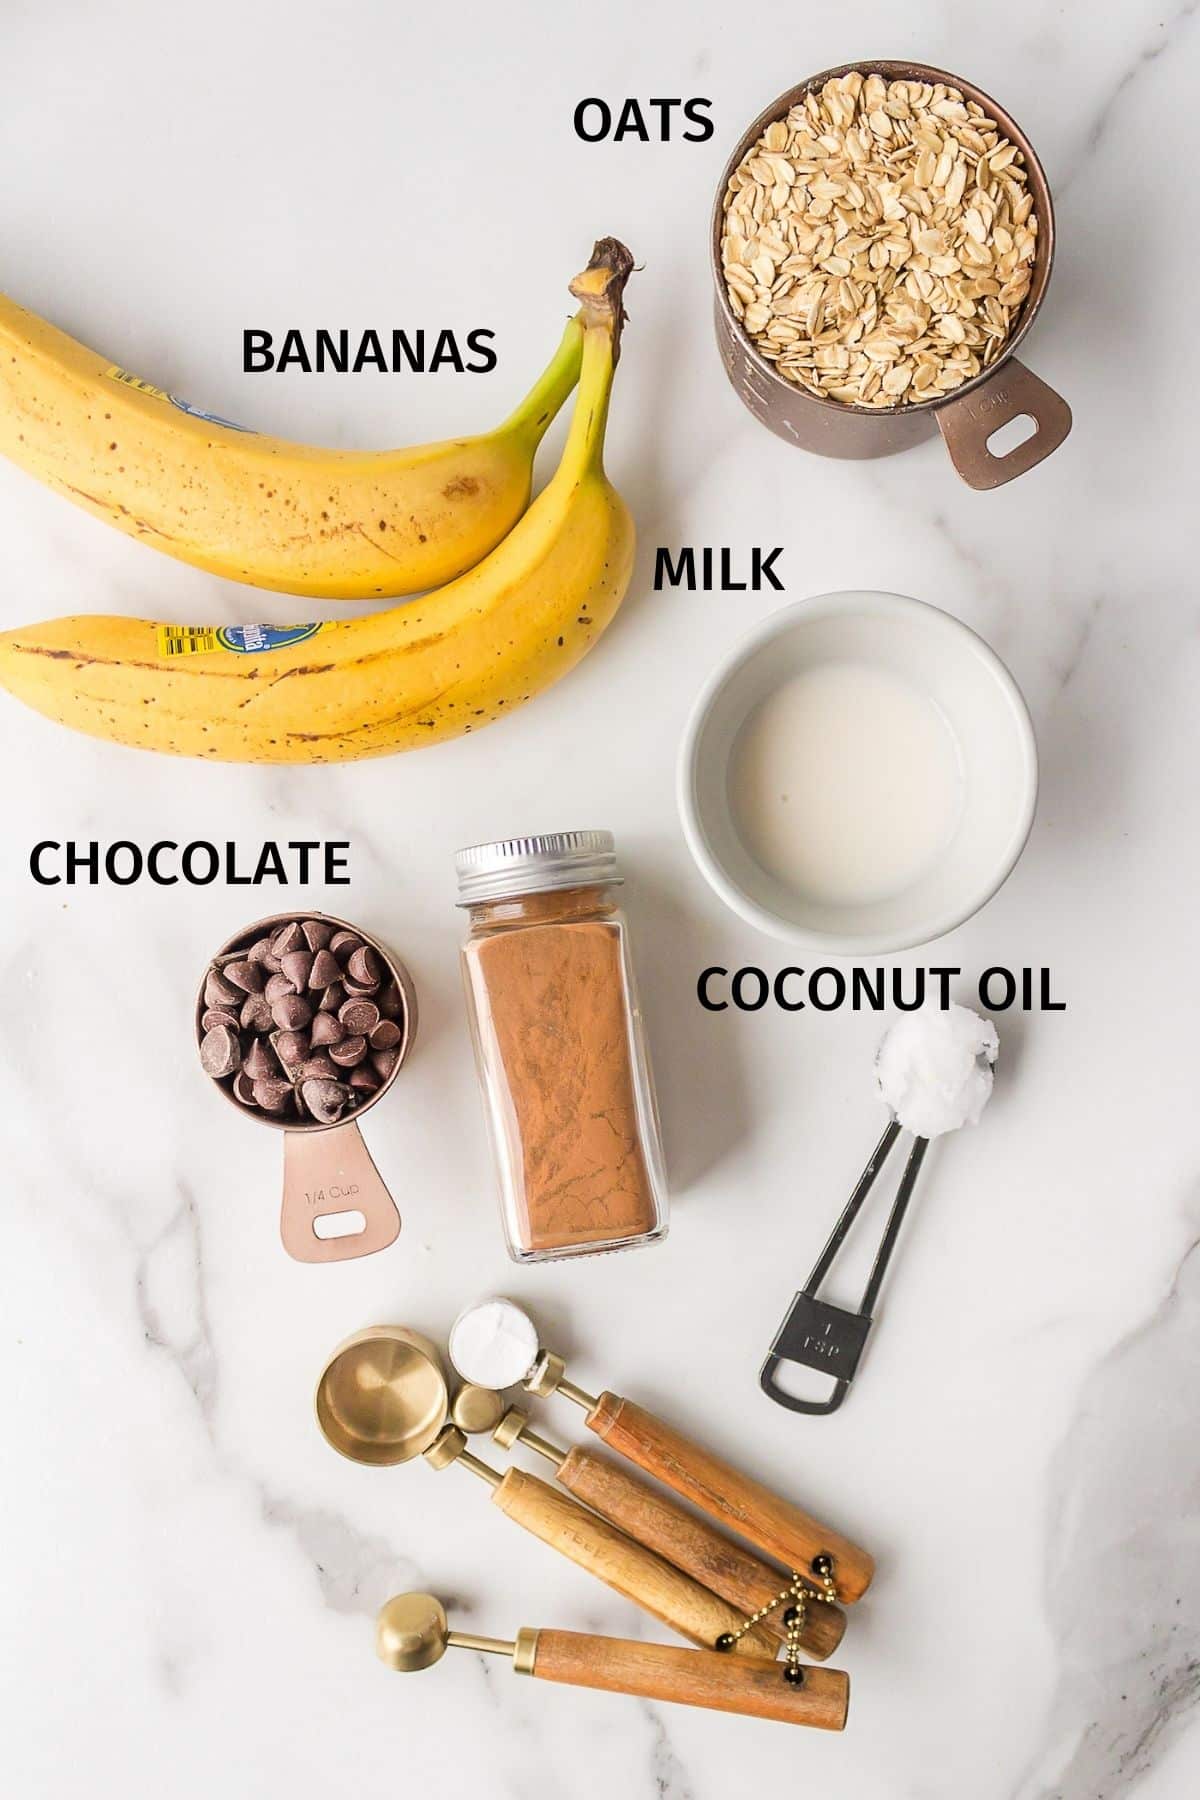 Labeled ingredients needed for banana oatmeal cookies on a white surface.